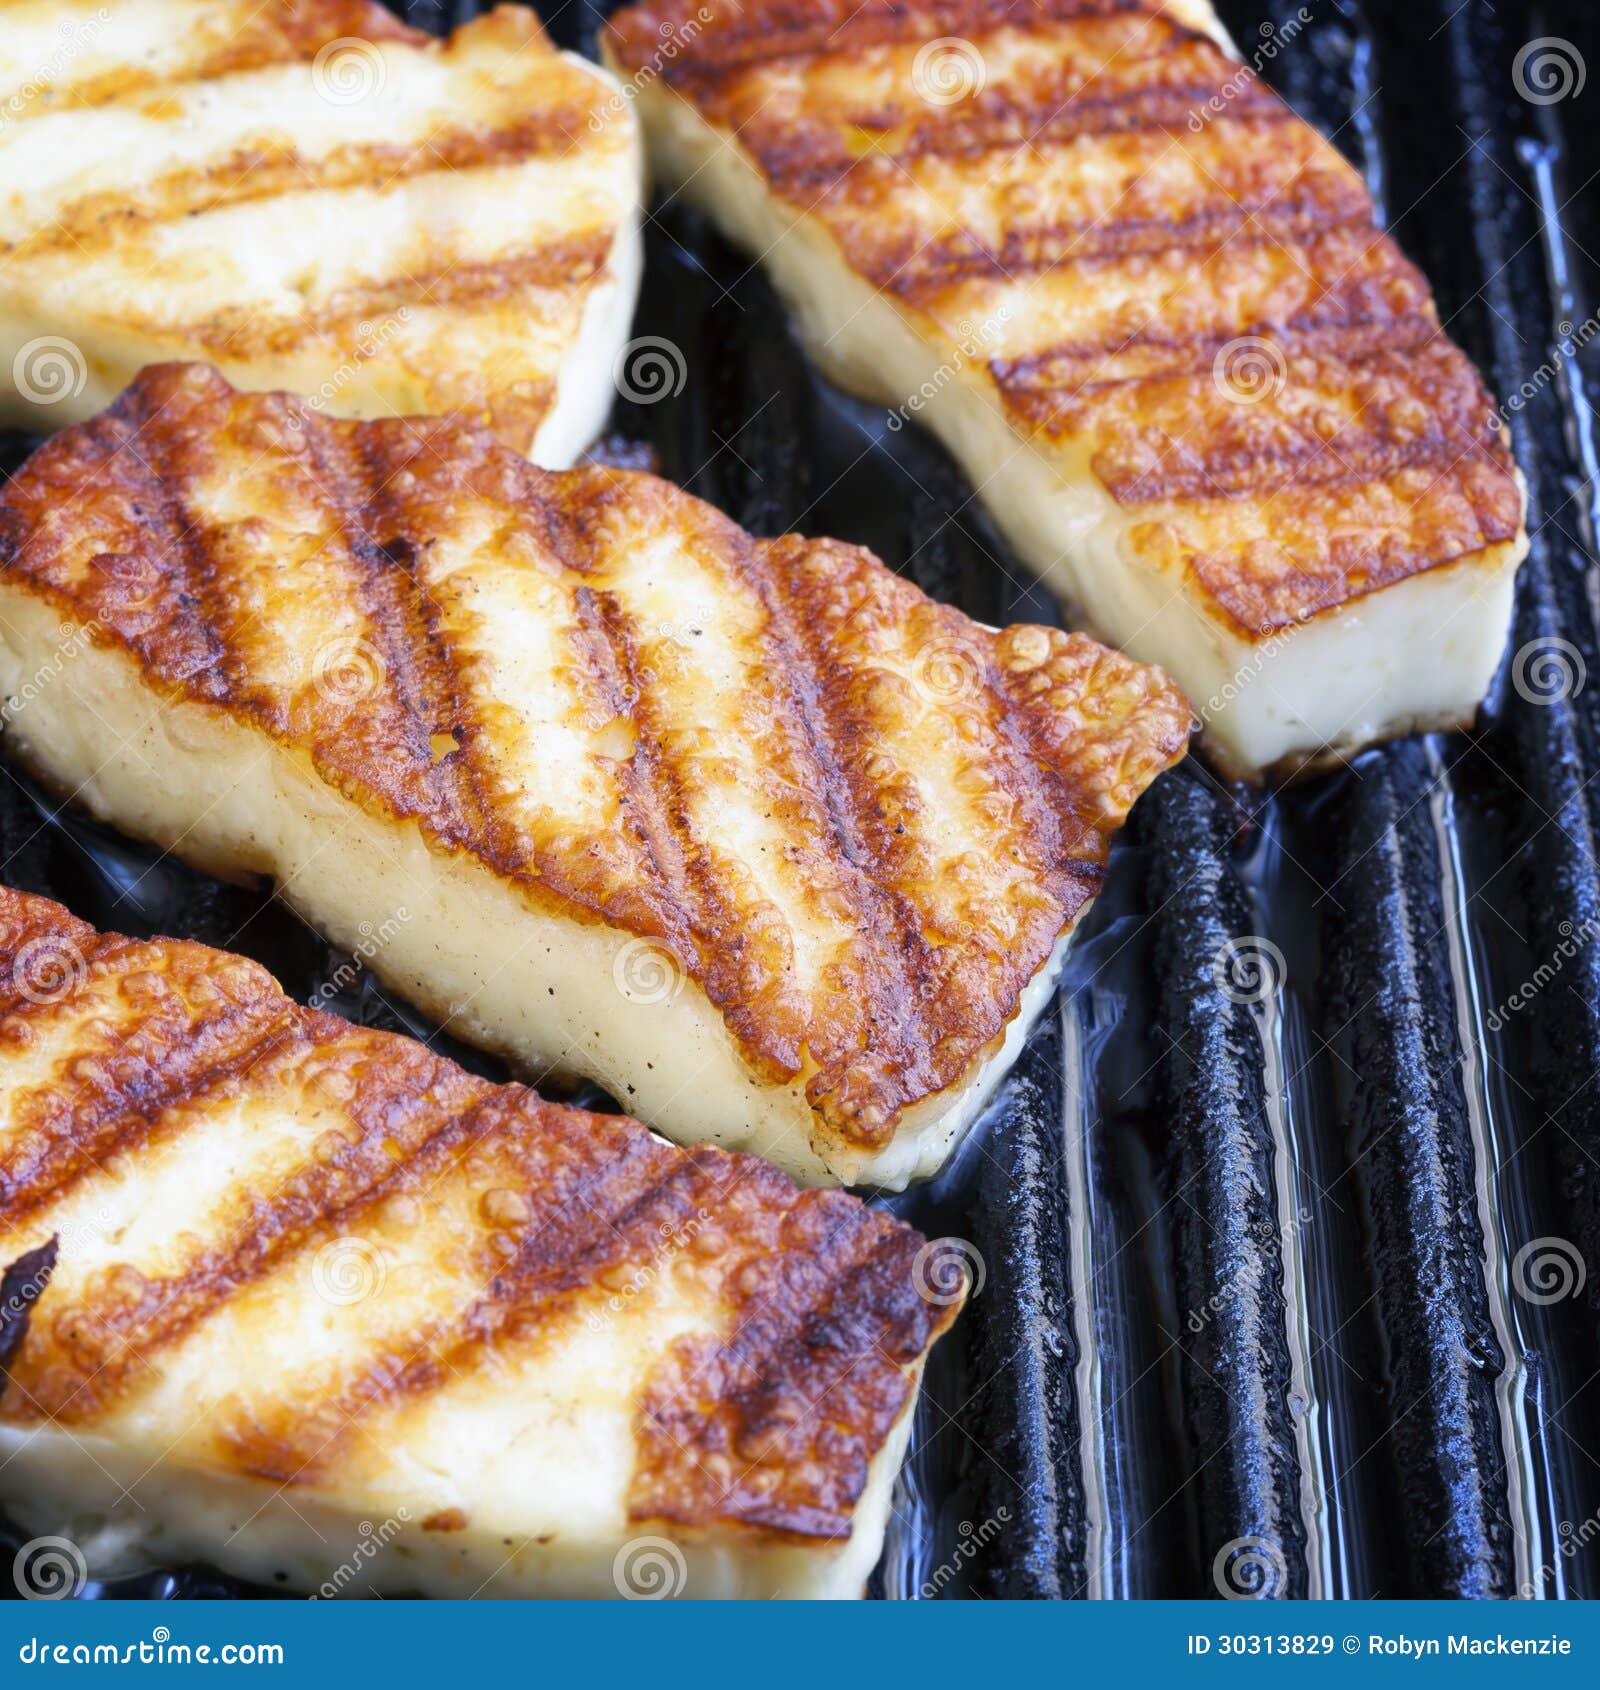 Grilling Halloumi Cheese stock image. Image of frying - 30313829